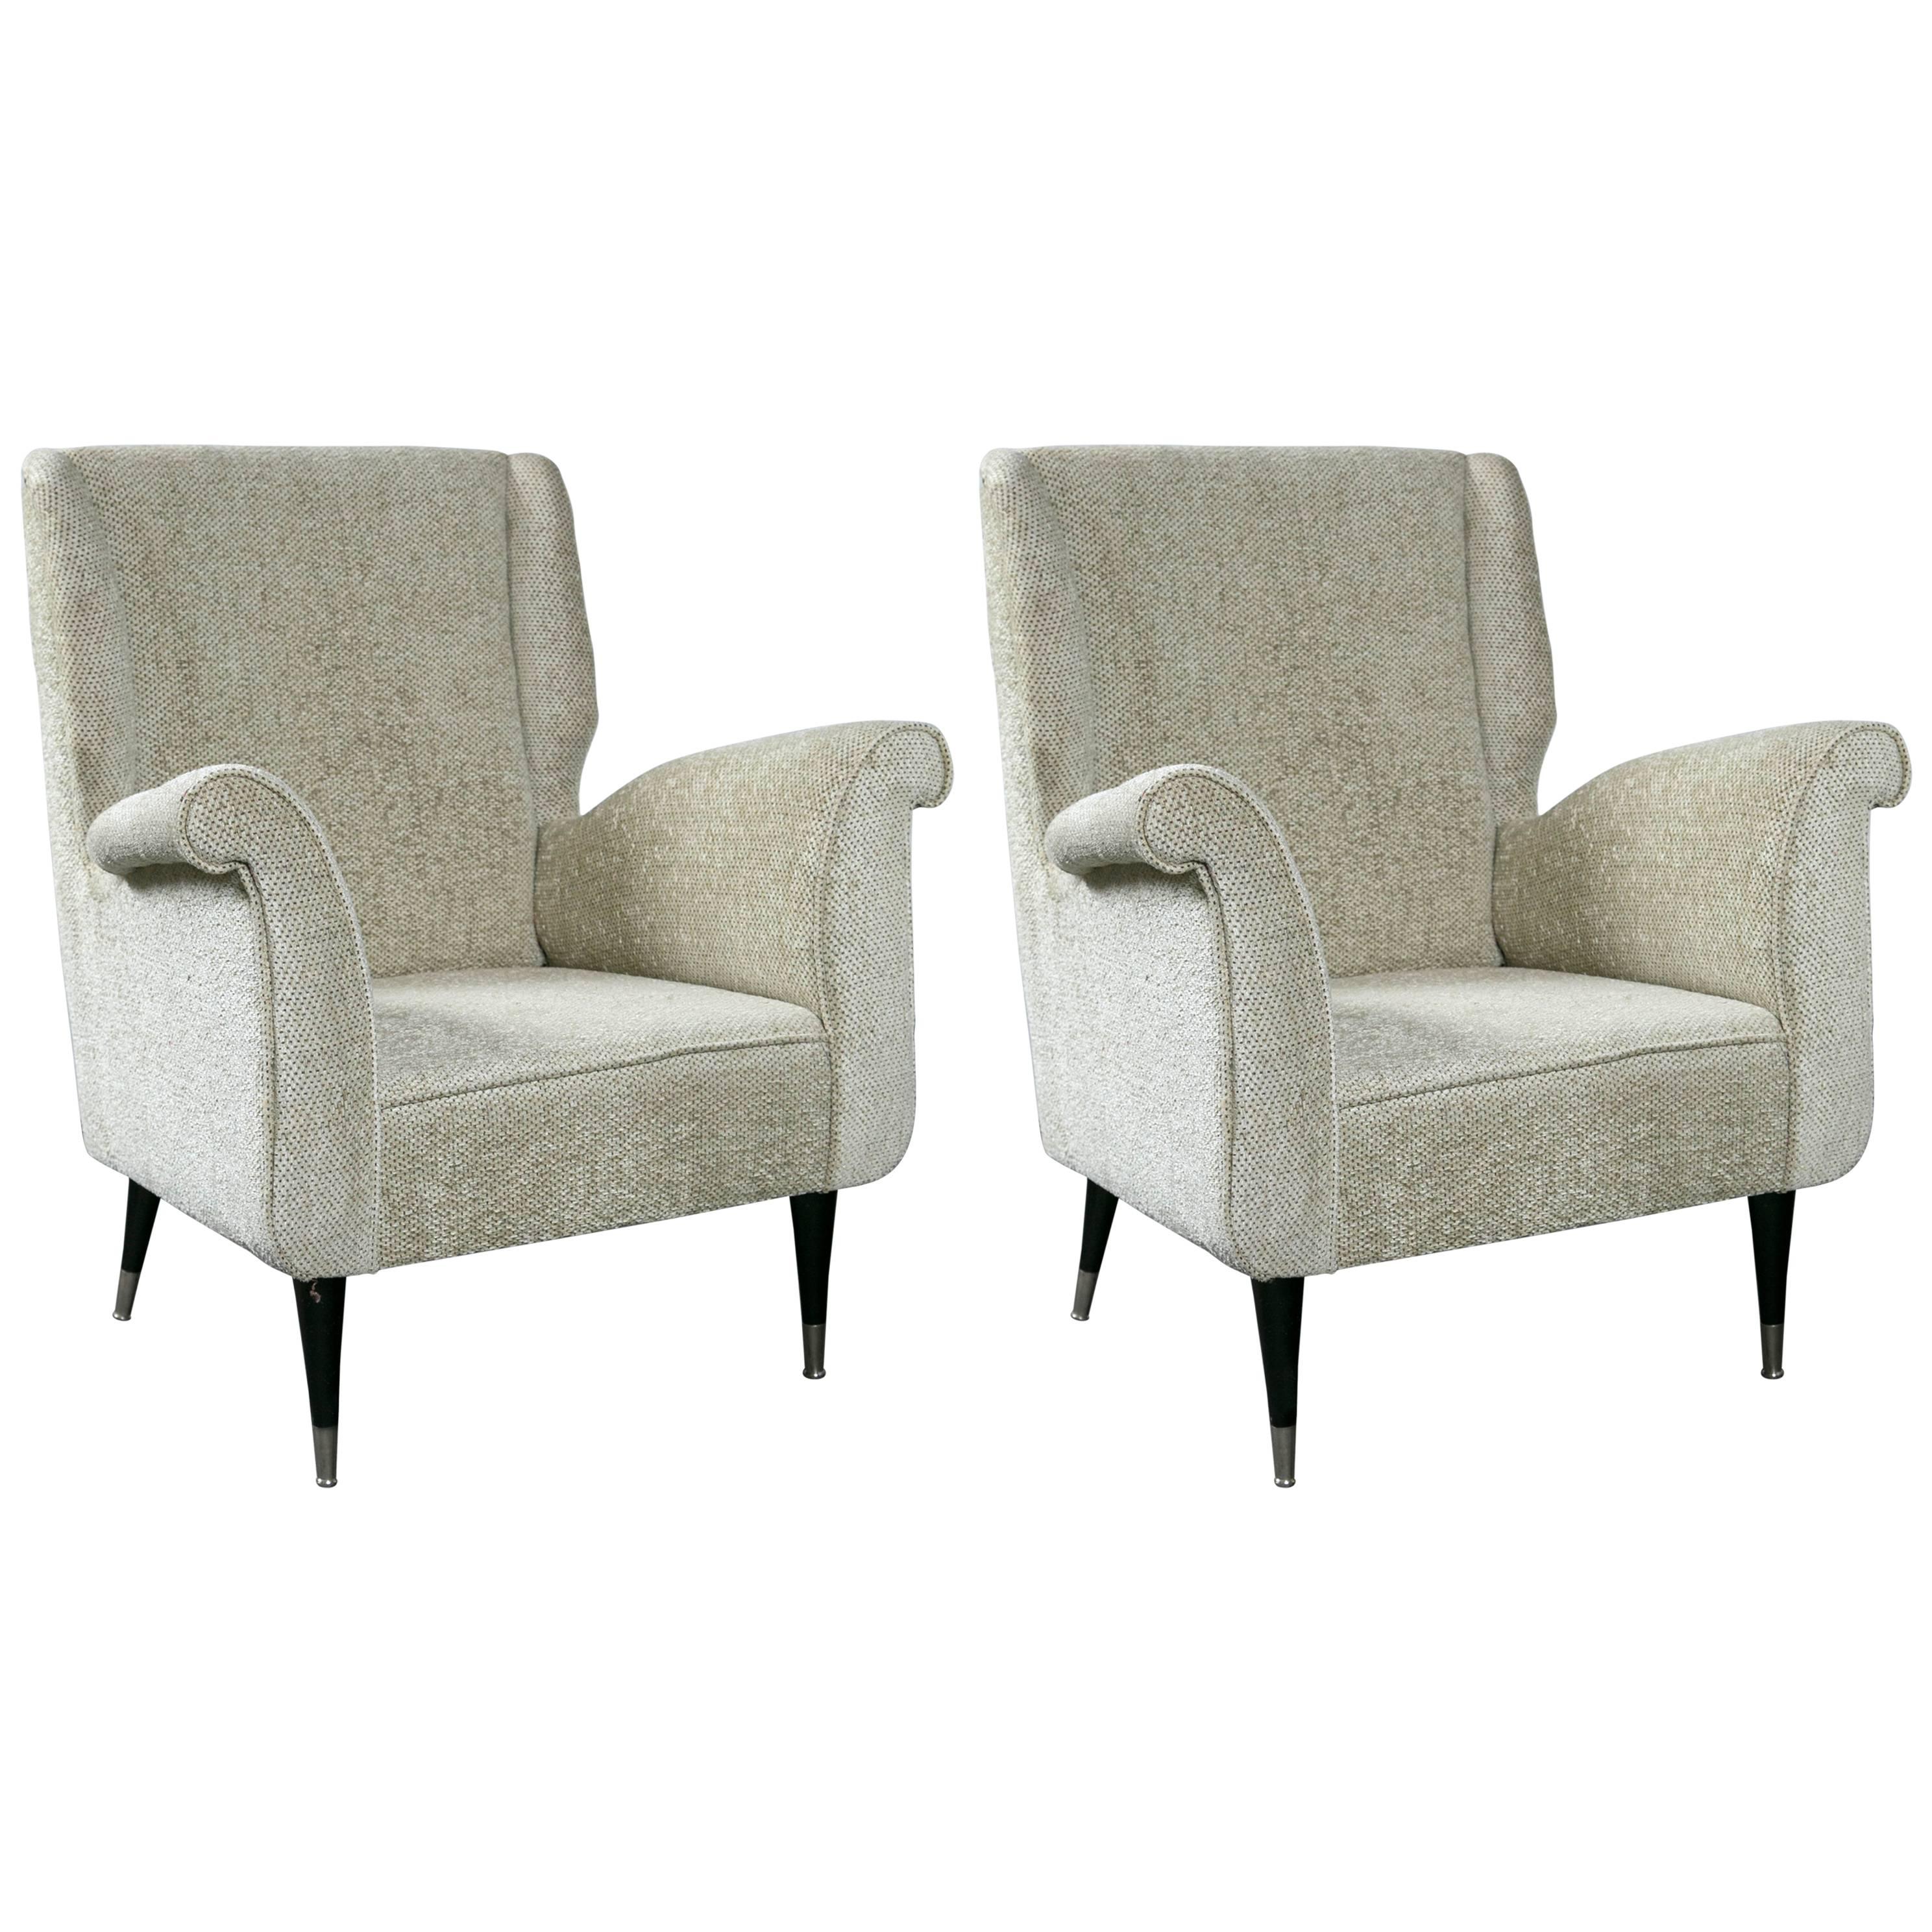 Pair of Mid-Century Modern Armchairs in the Style of Gio Ponti